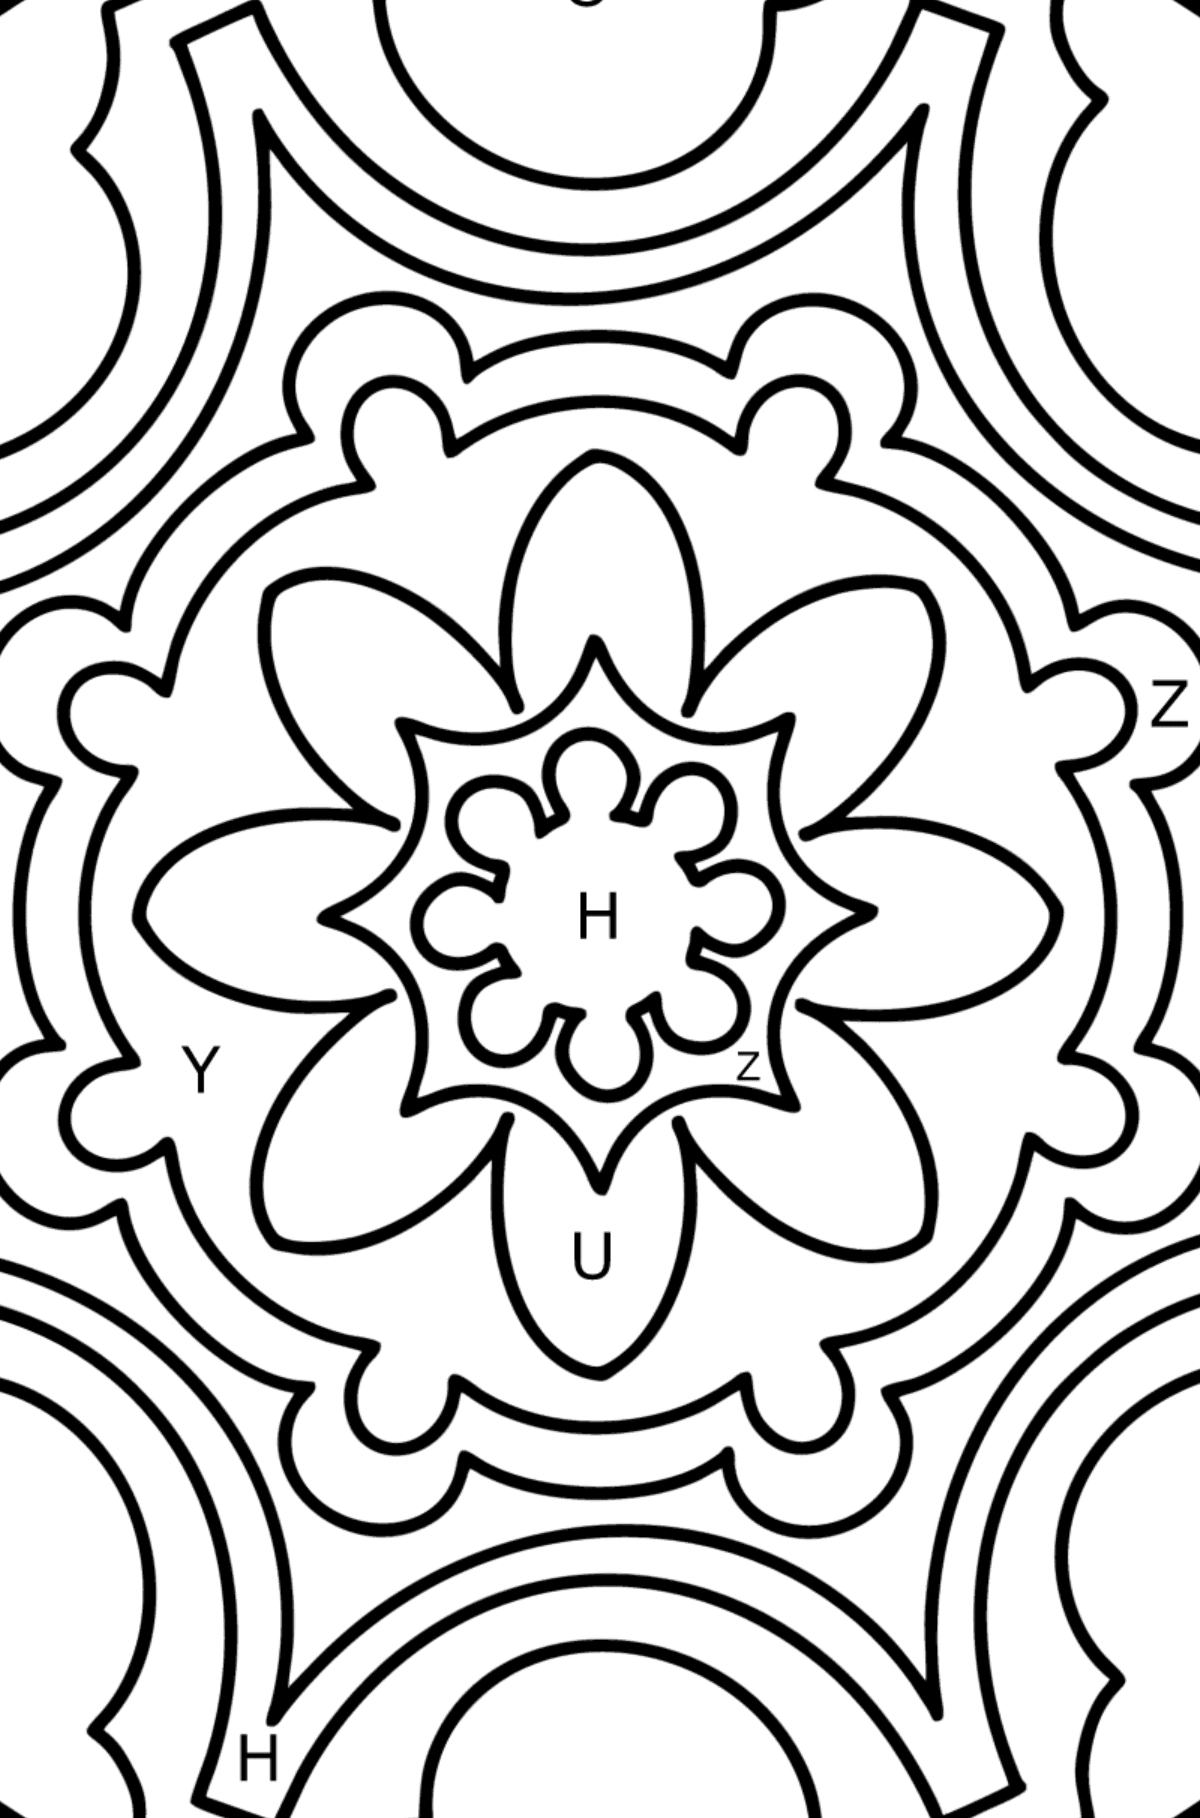 Mandala coloring page - 9 elements - Coloring by Letters for Kids